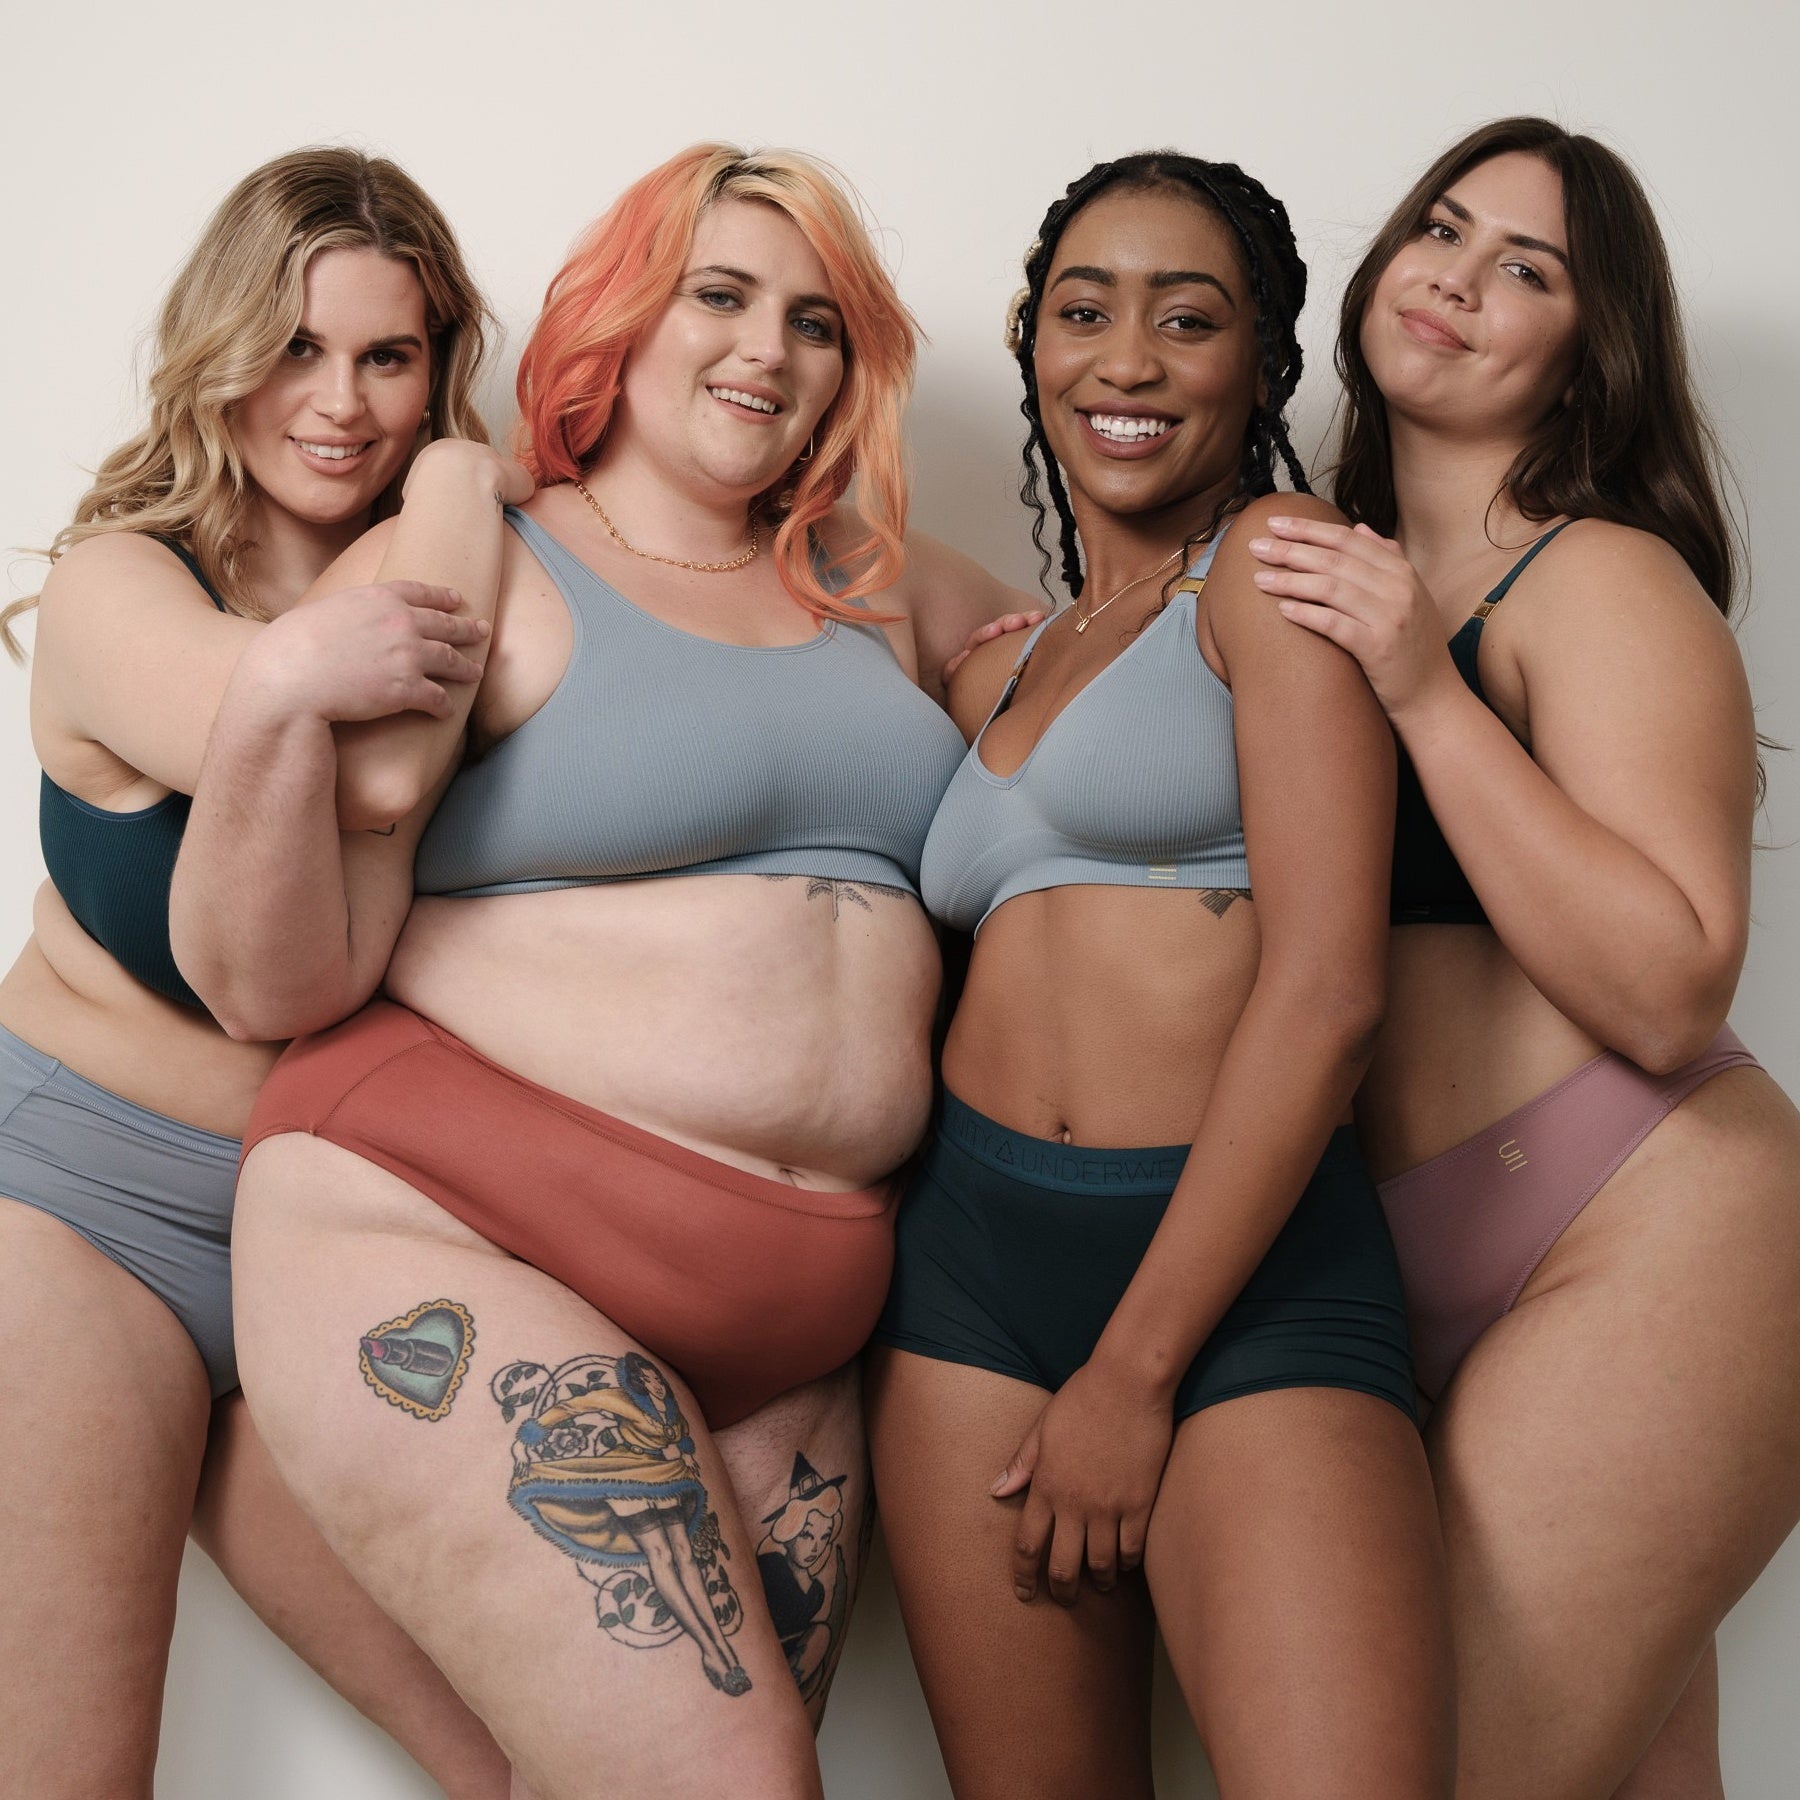 Any 5 For $85 – Underwear for Humanity